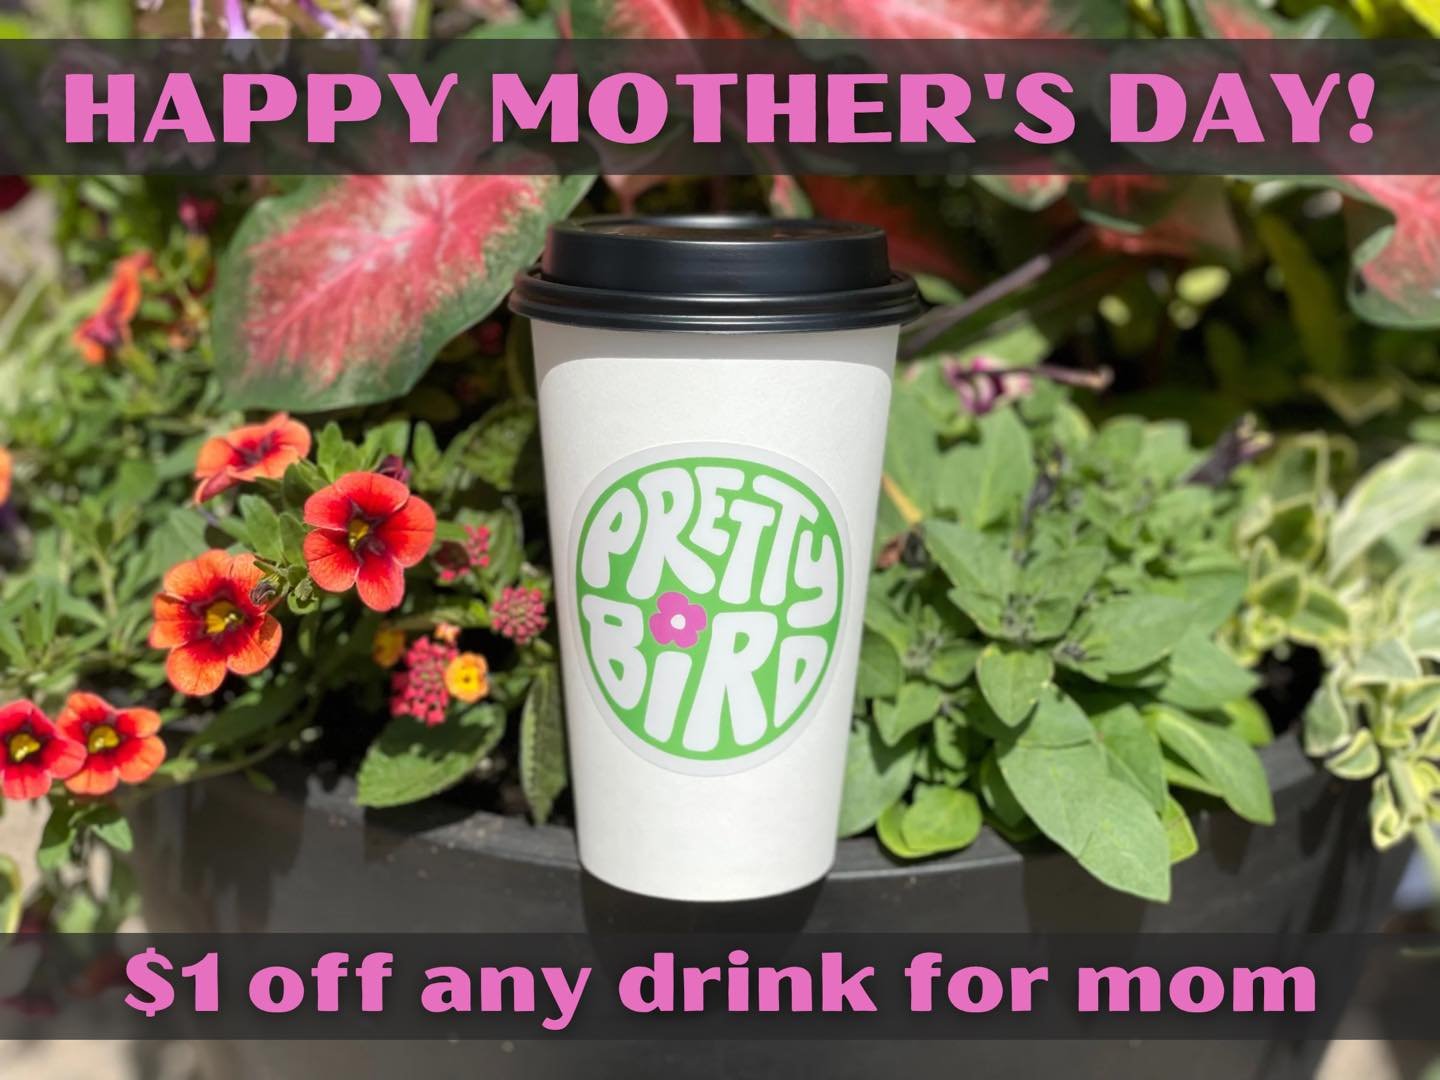 HAPPY MOTHER&rsquo;S DAY!

hey mom, thanks for all you do. we think you&rsquo;re absolutely incredible, and as a small way of saying thank you, we are taking $1 off any drink for you today.

now go out and get your mama her favorite coffee to brighte